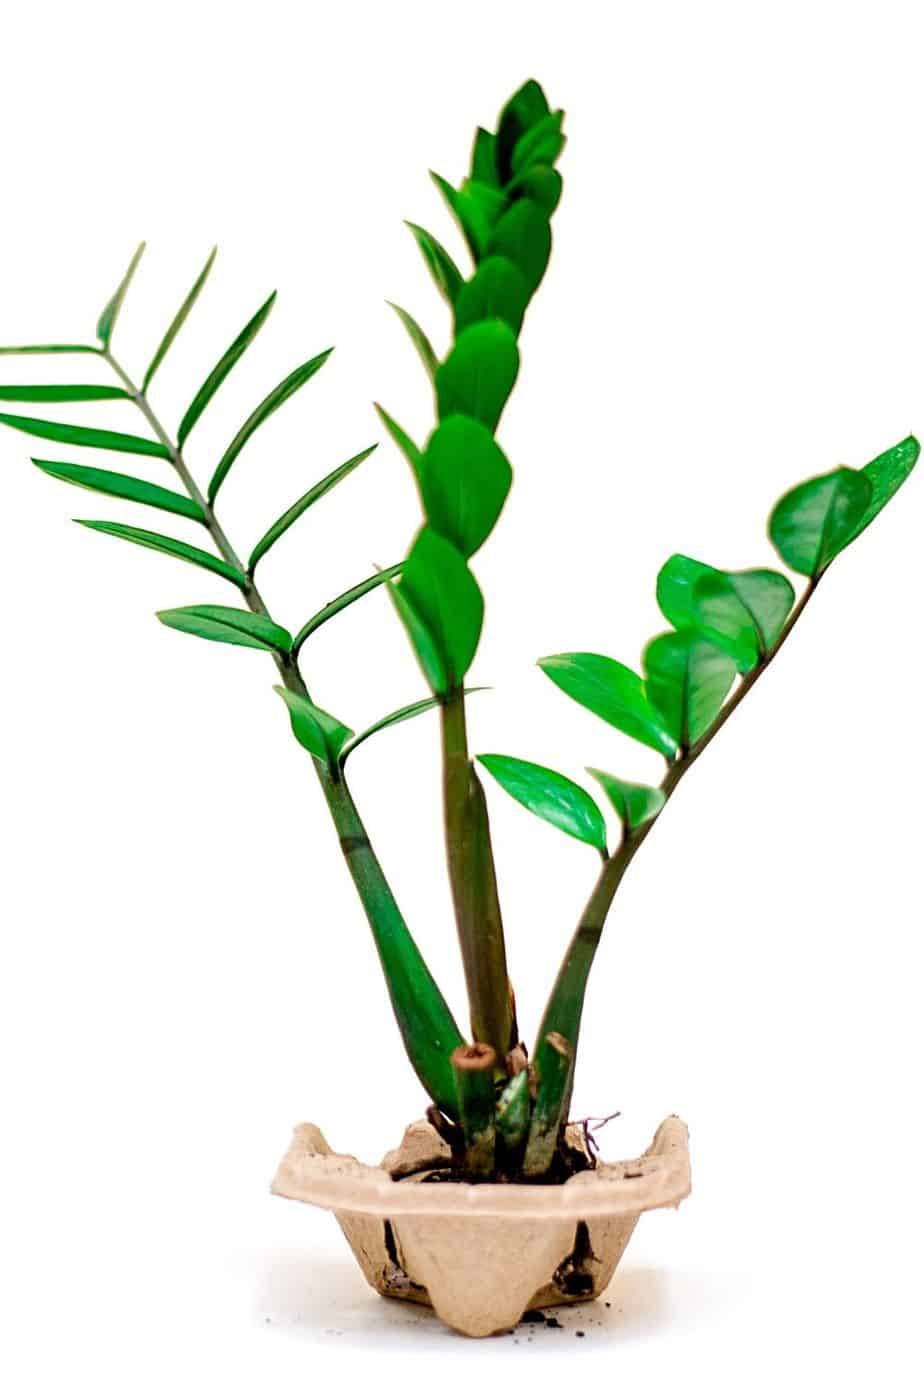 ZZ Plant thrives in areas receiving minimal light as in the case of a northwest-facing window